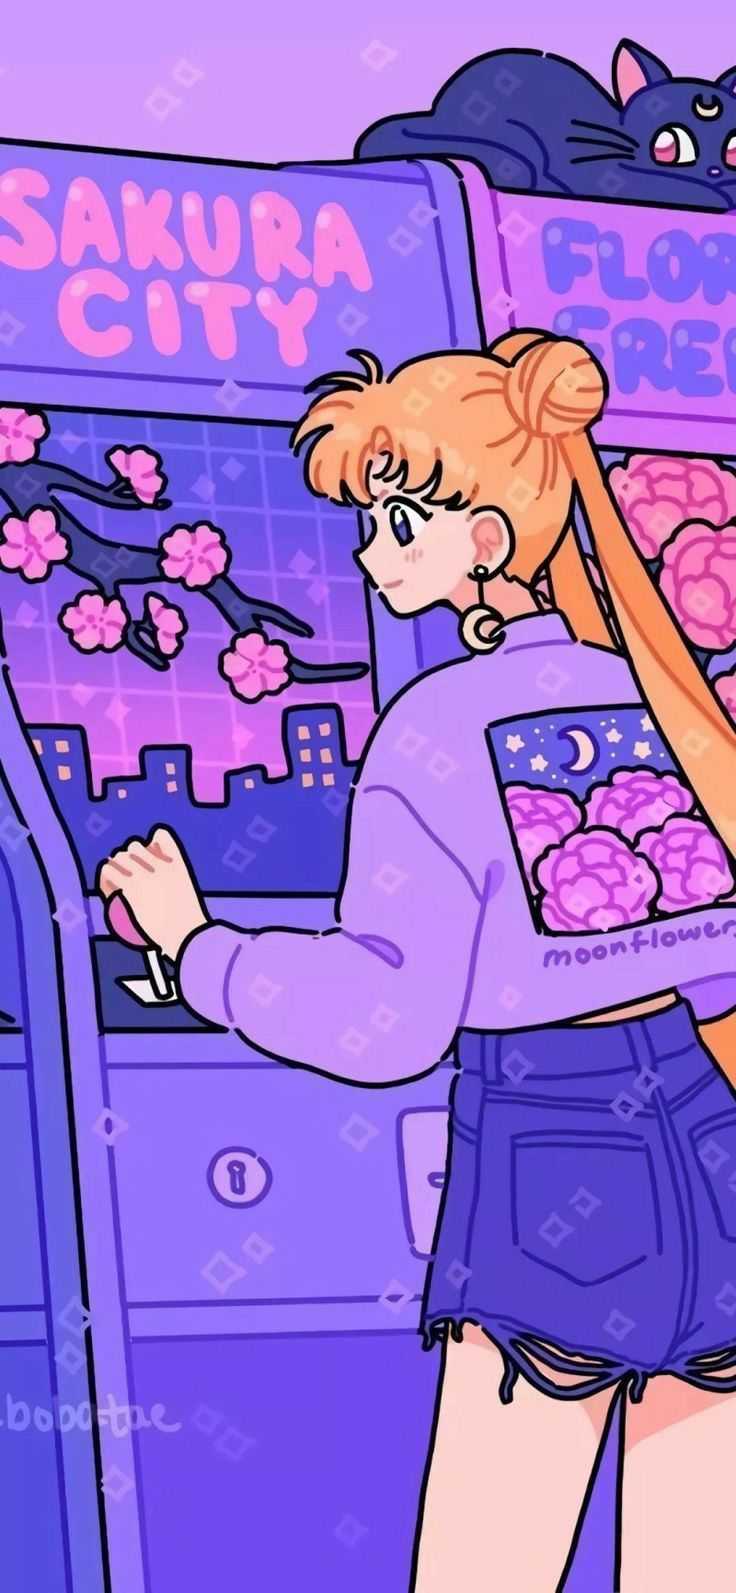 Sailor moon aesthetic wallpaper for phone with the power of the moon - Sailor Moon